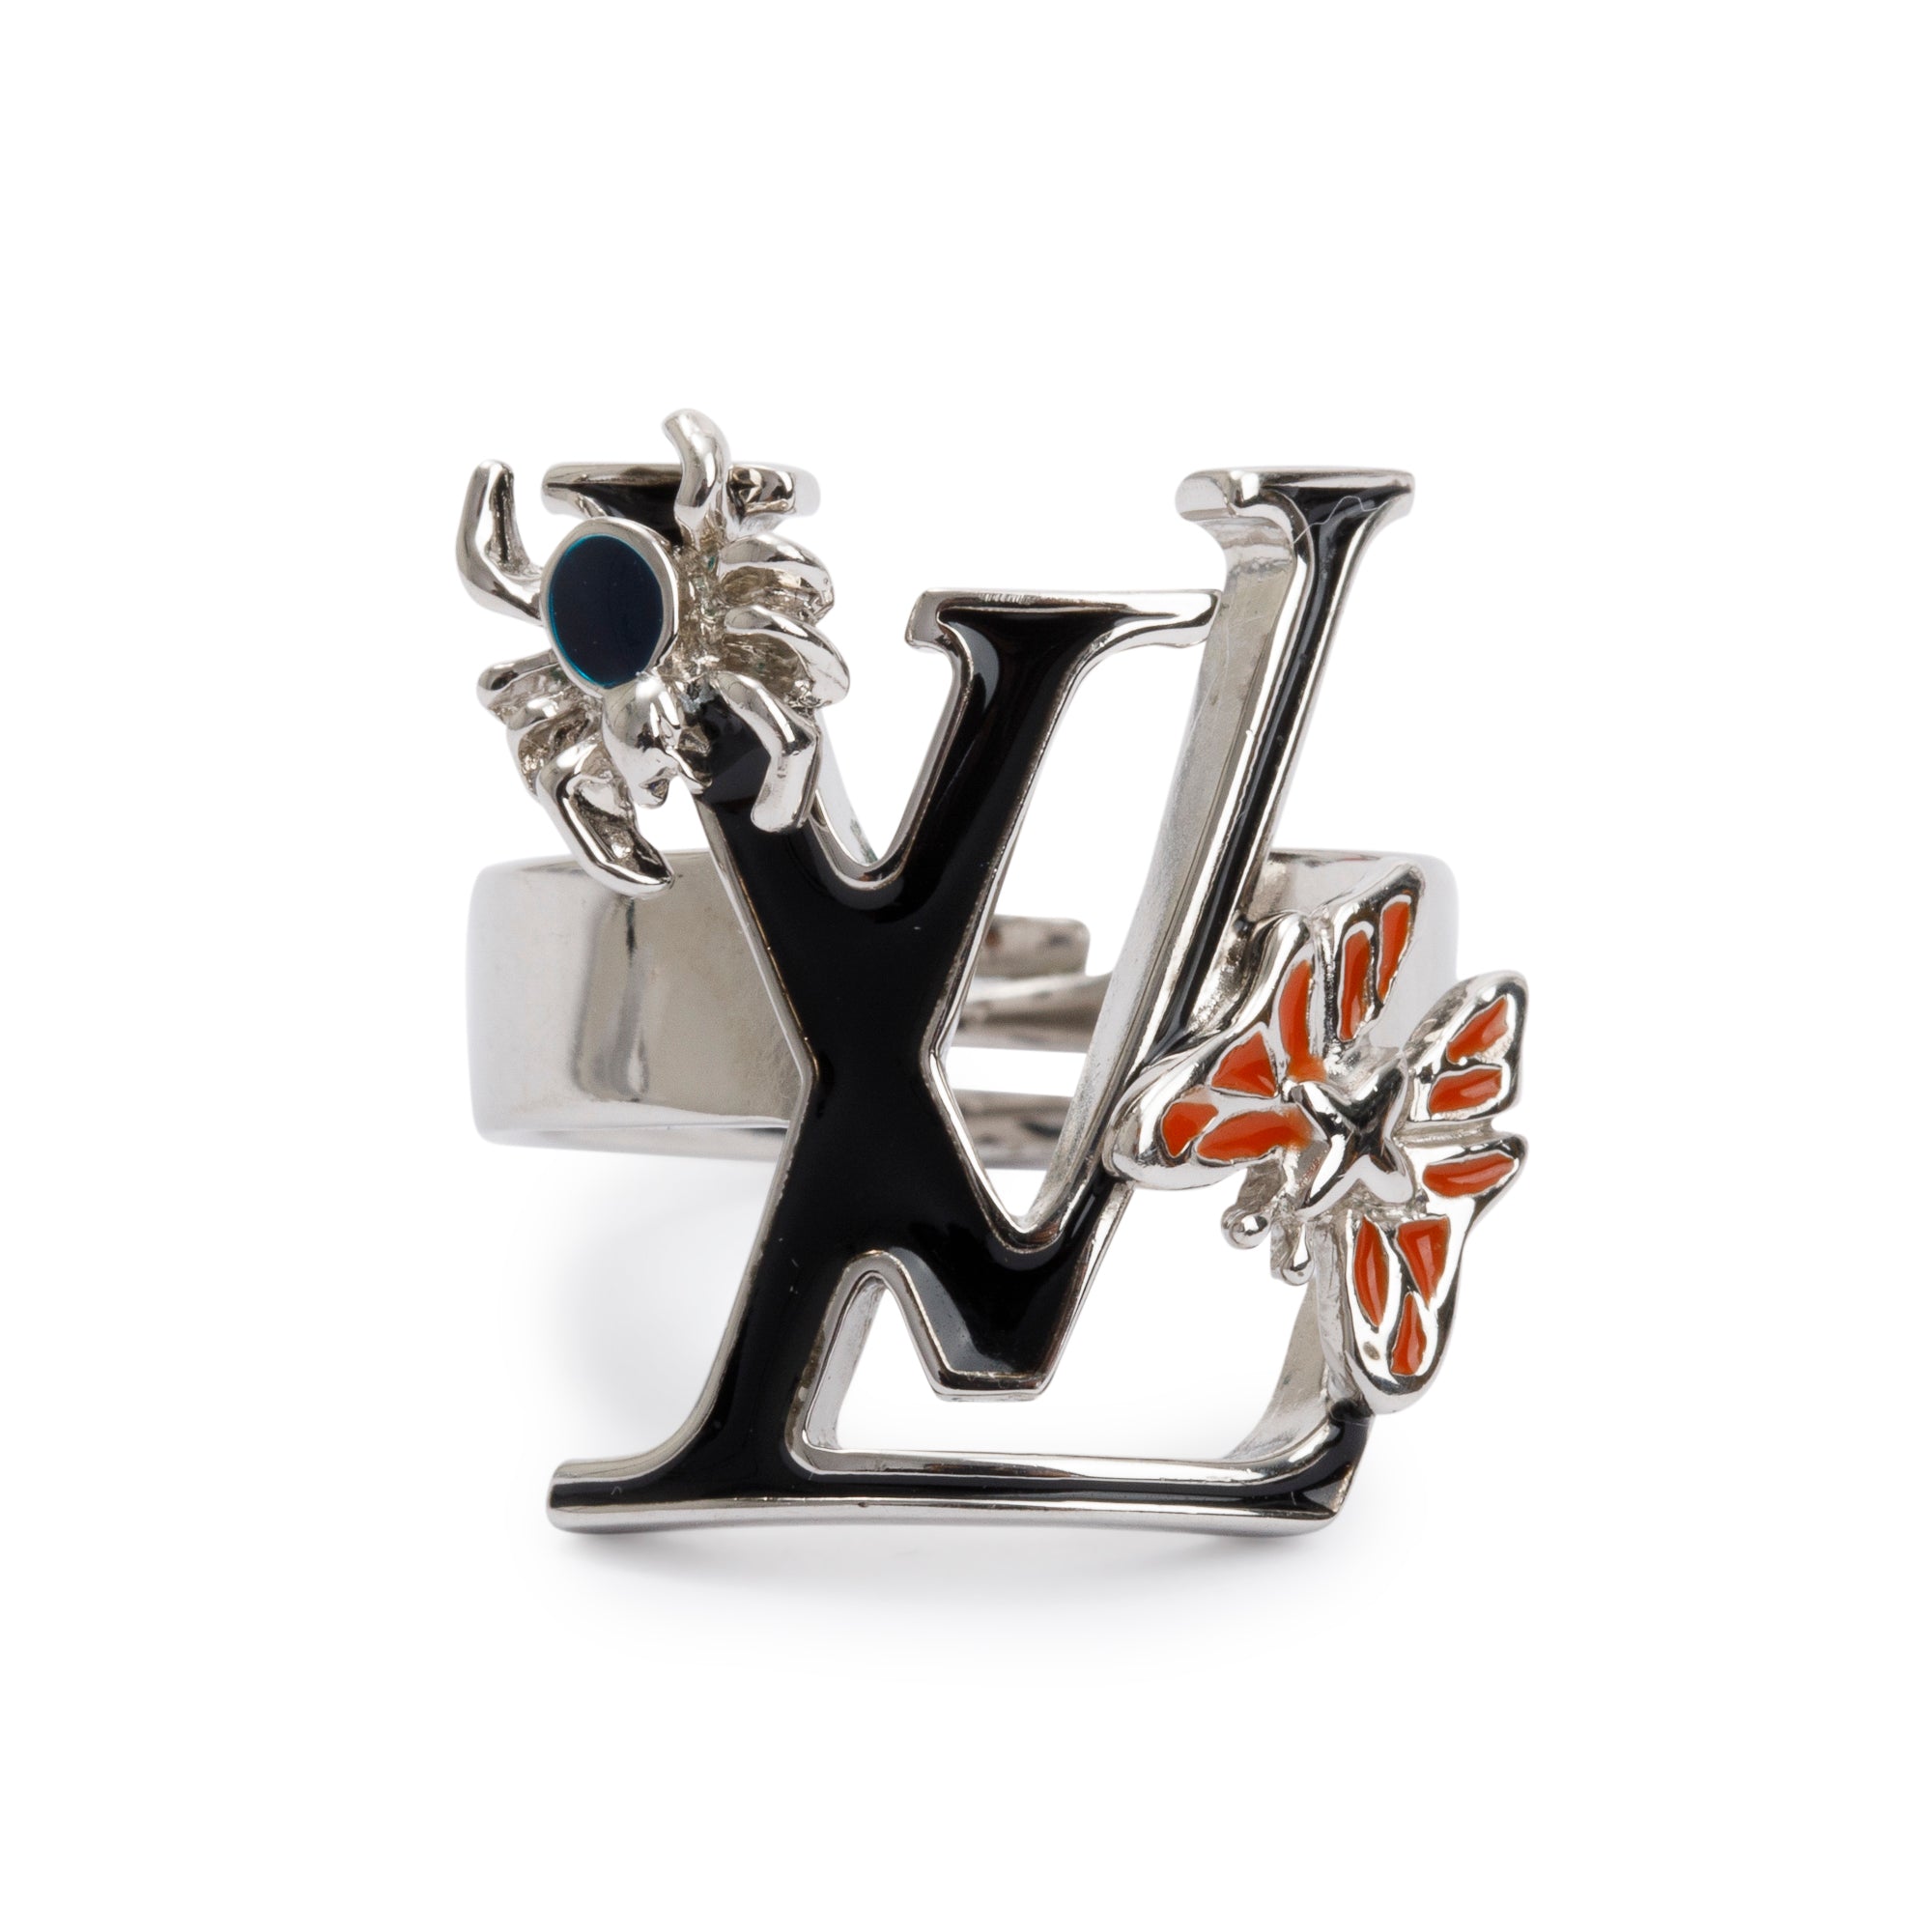 LOUIS VUITTON MP2453 Accessories Bergset 4LV Fairy Tail 3 points only Ring